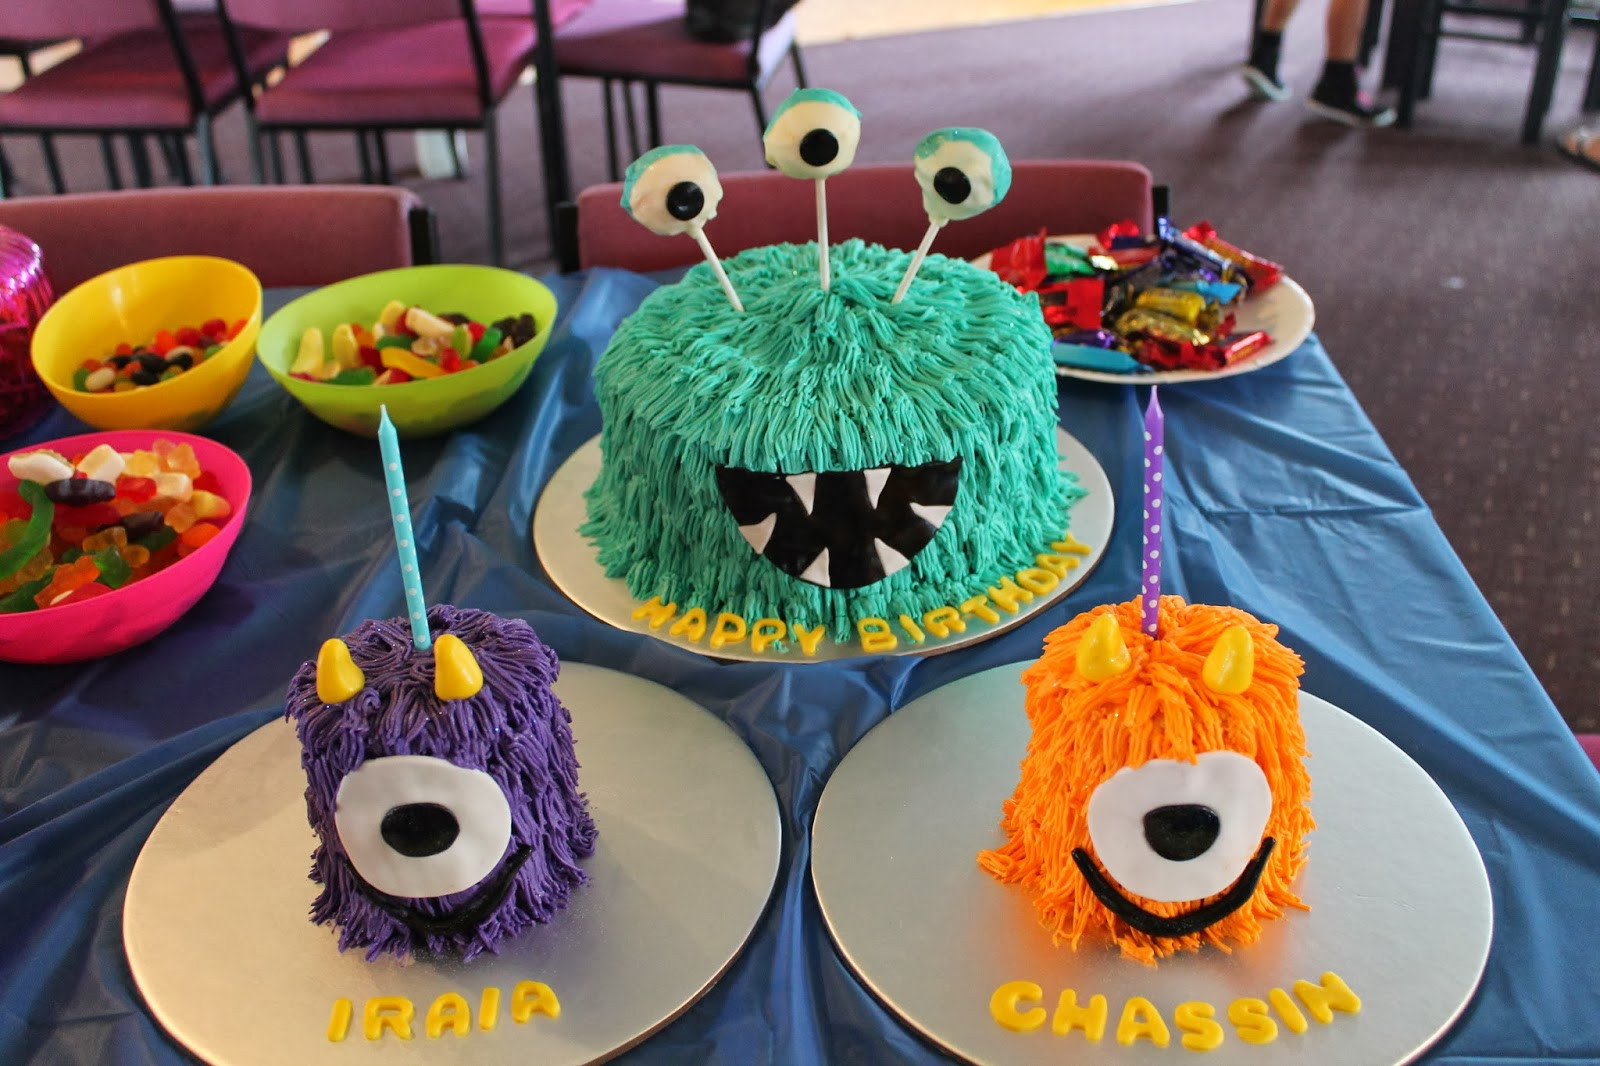 Best ideas about Monster Birthday Cake
. Save or Pin Kara s Cake s Monster Cake and Smash Cake s Now.